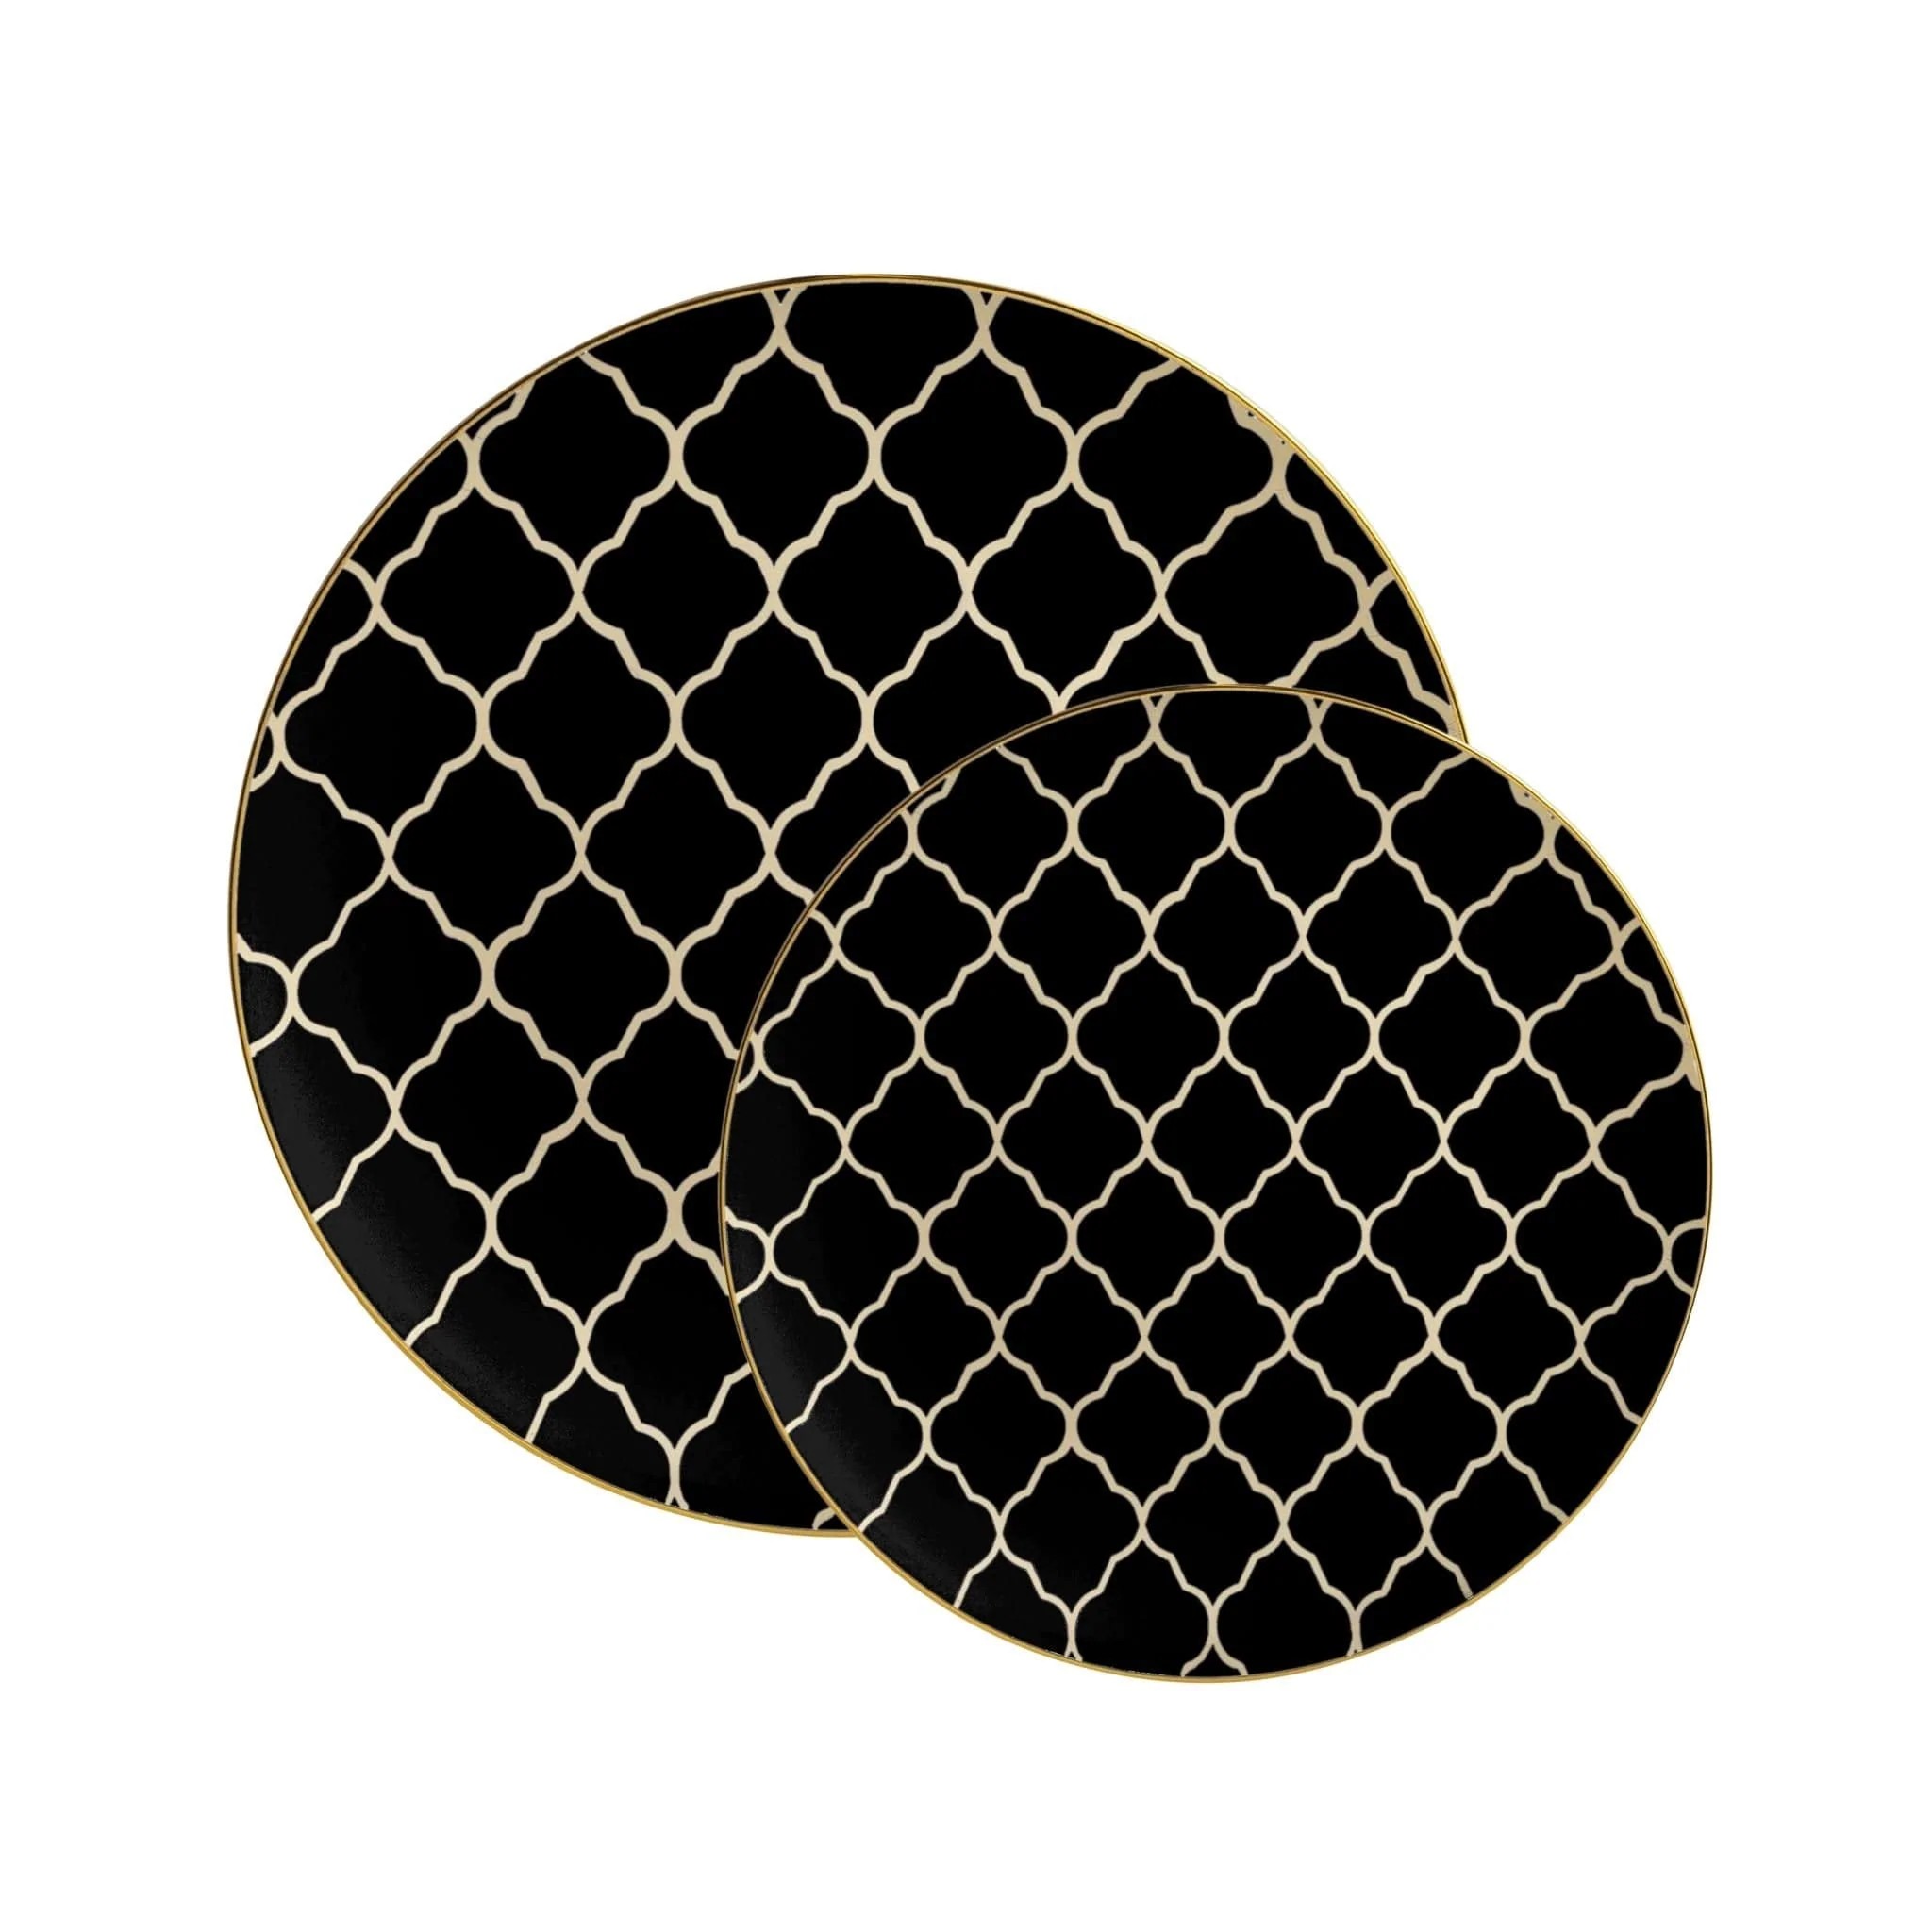 Luxe Party Black with Gold Lattice Pattern Plastic Dinner Plate 10.25